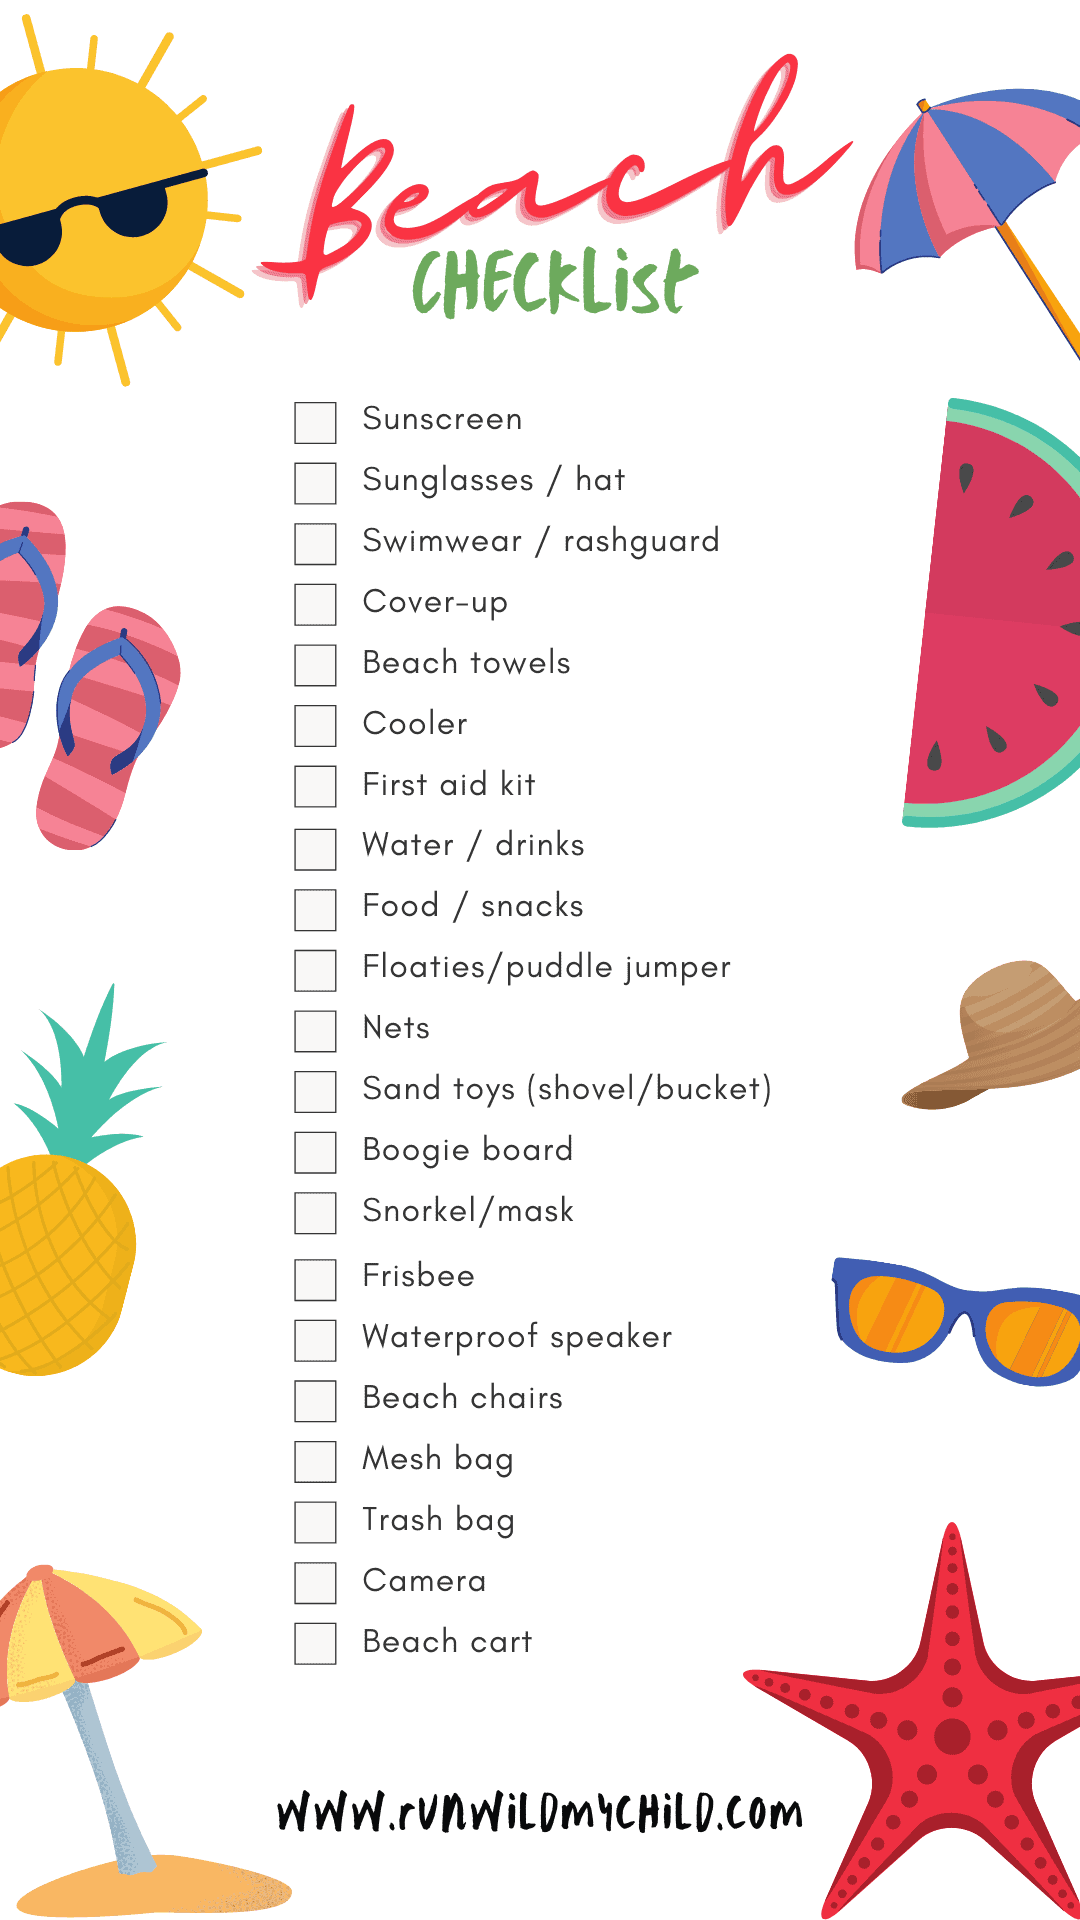 packing-tips-for-a-day-at-the-beach-with-kids-run-wild-my-child